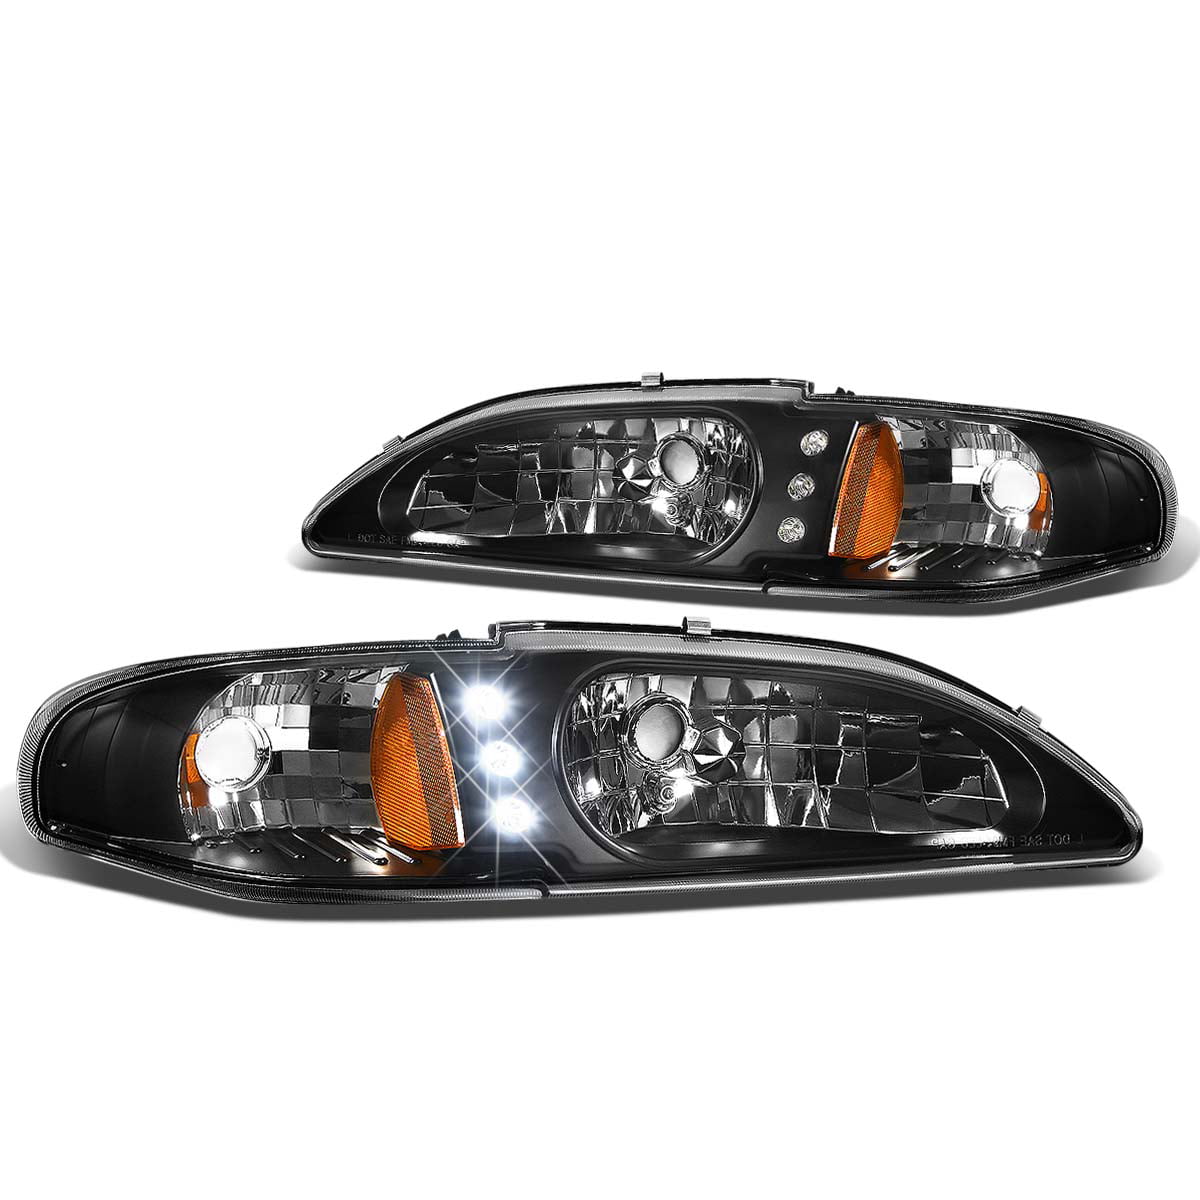 Corner Signal Lamp Set Clear 94 95 96 97 98 Ford Mustang Headlights